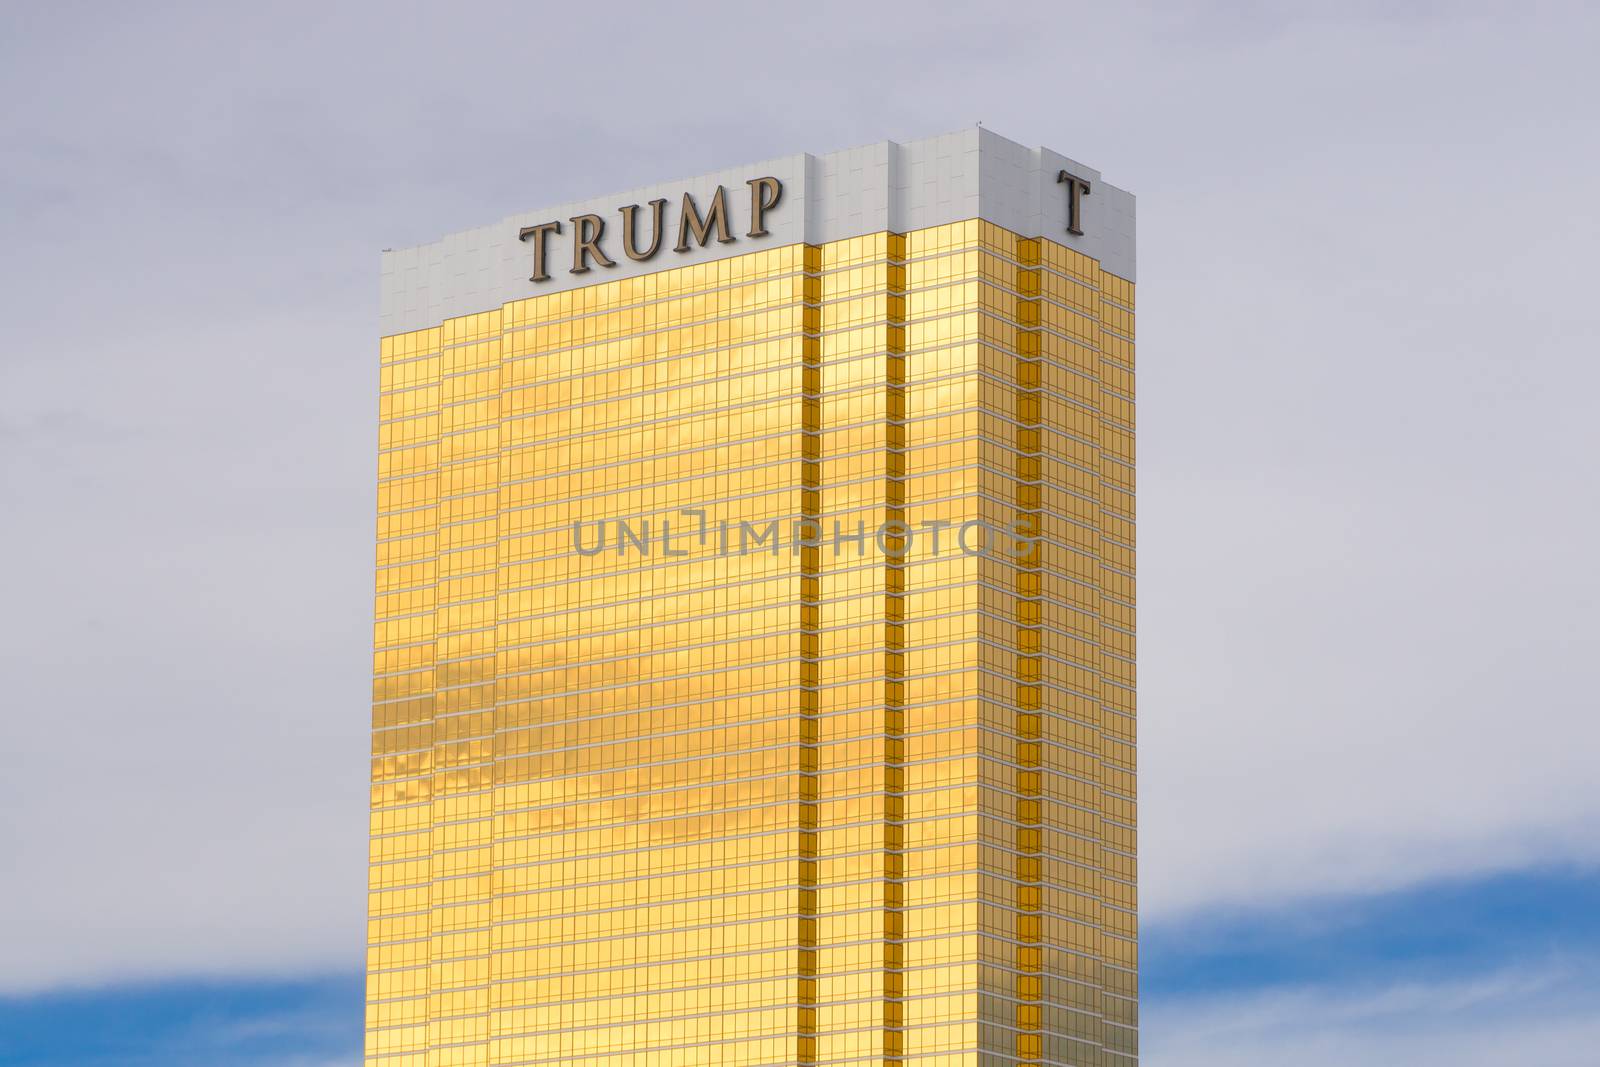 LAS VEGAS, NV/USA - FEBRUARY 14, 2016: The Trump Hotel Las Vegas timeshare and hotellocated on the Las Vegas Strip. The Trump is named after businessman, celebrity and politician Donald Trump.